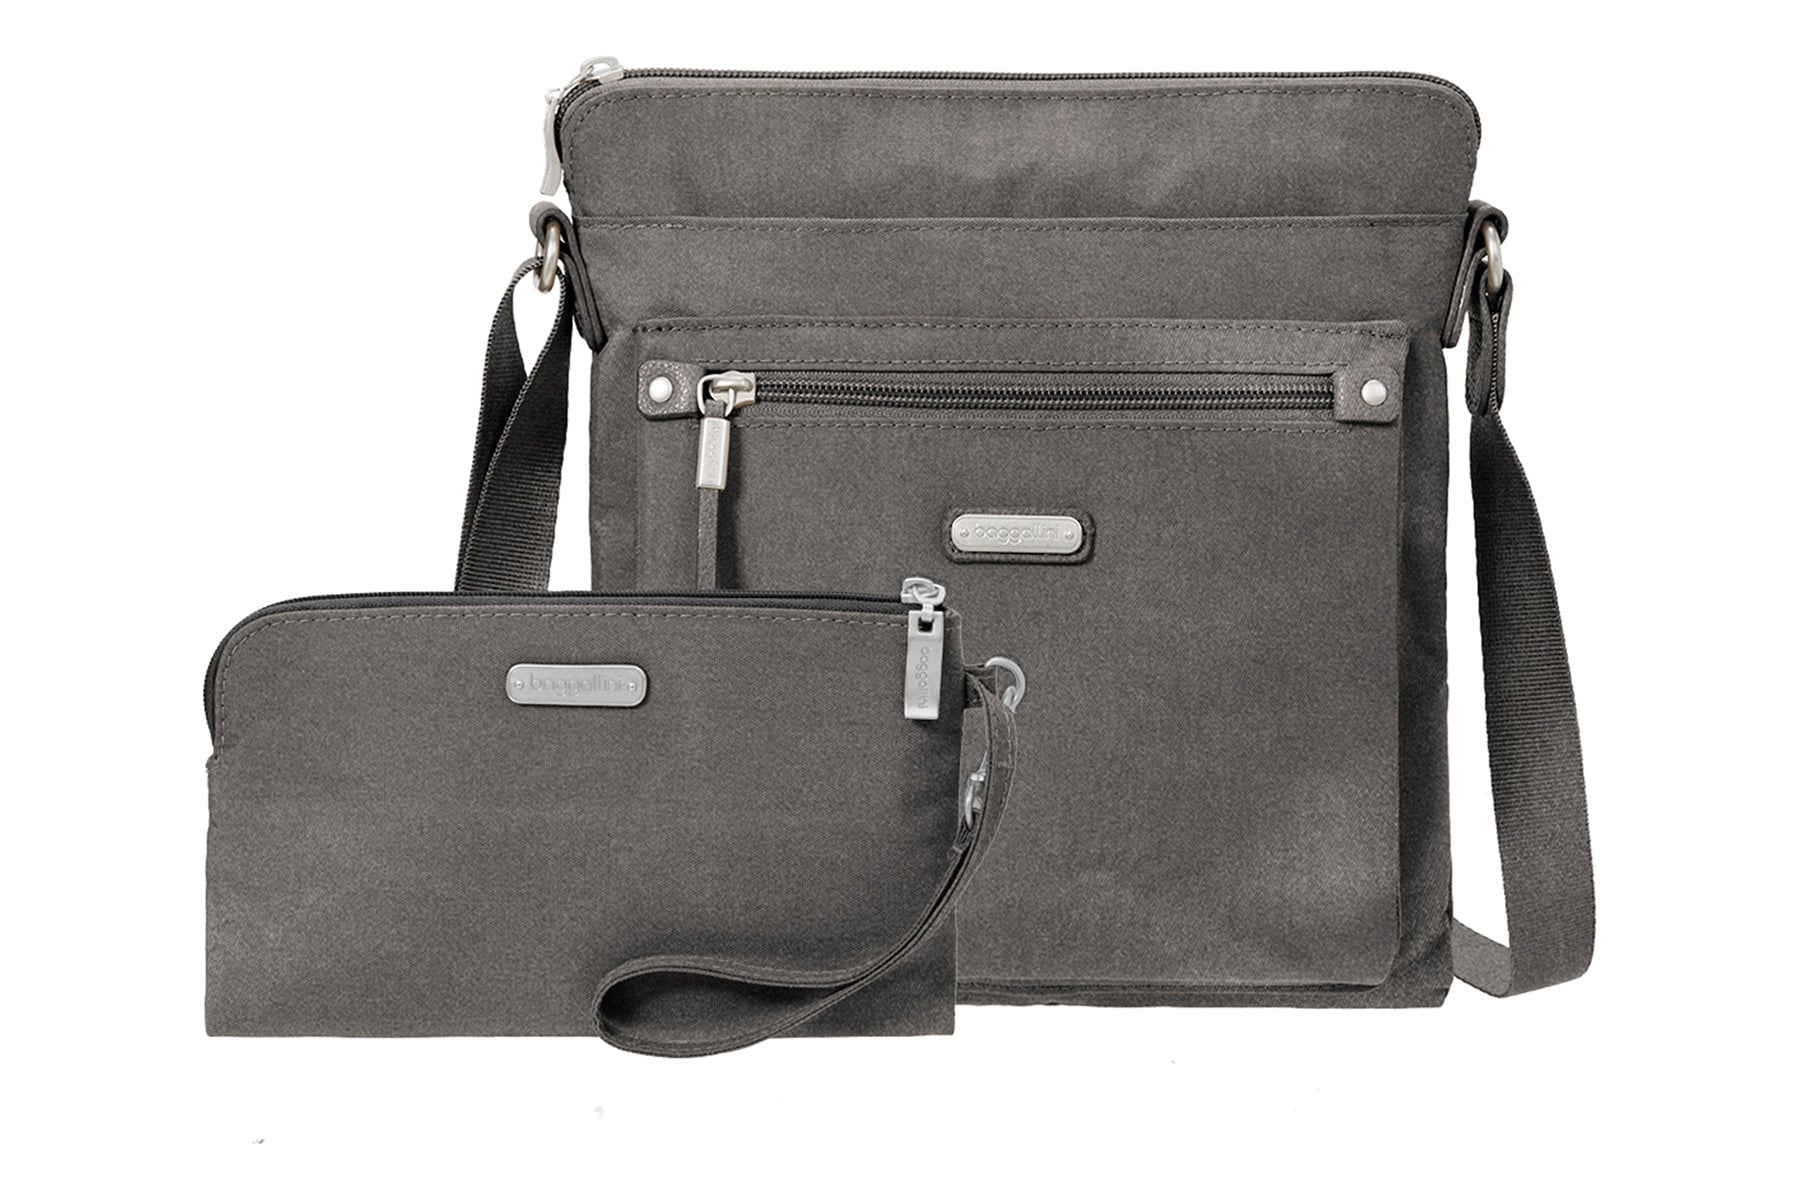 Baggallini Go Bagg With RFID Wristlet